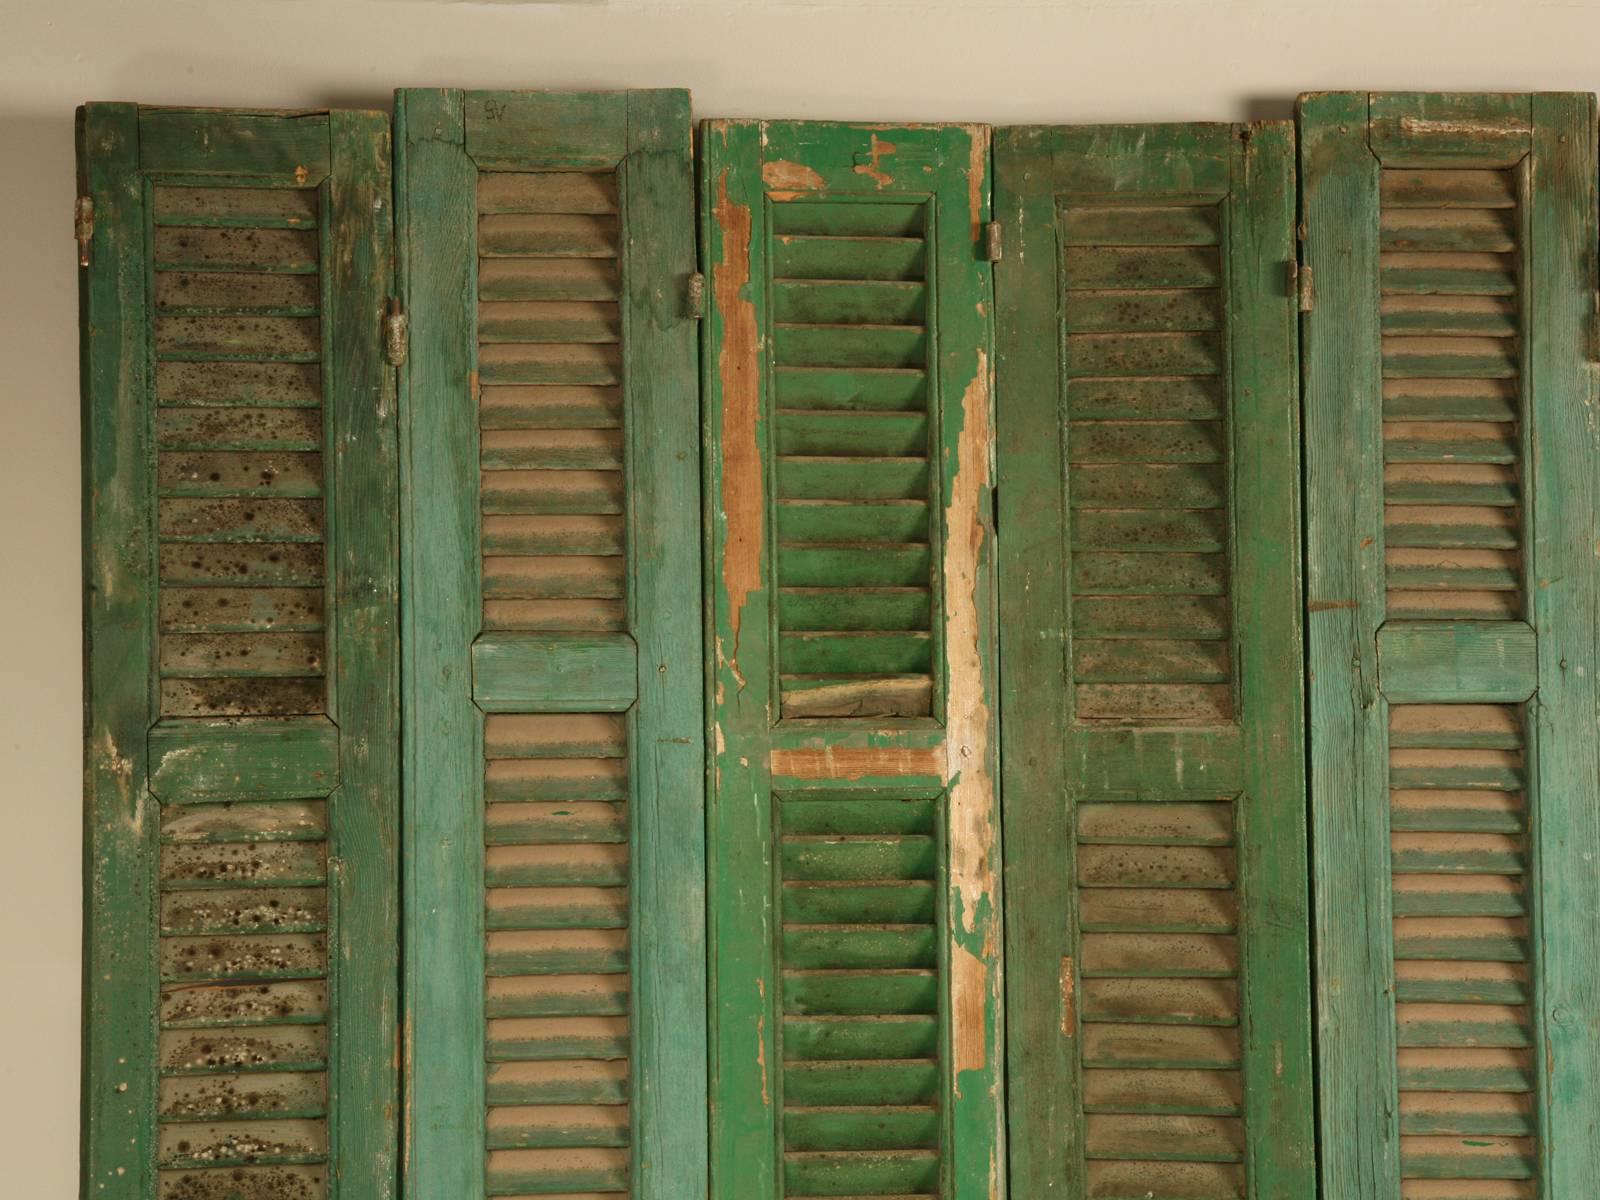 Found in Brittany and removed from a French chateau many years ago, this set of eight green shutters could be used for a myriad of different applications. From a simple room divider to a headboard there are endless possibilities. We have others